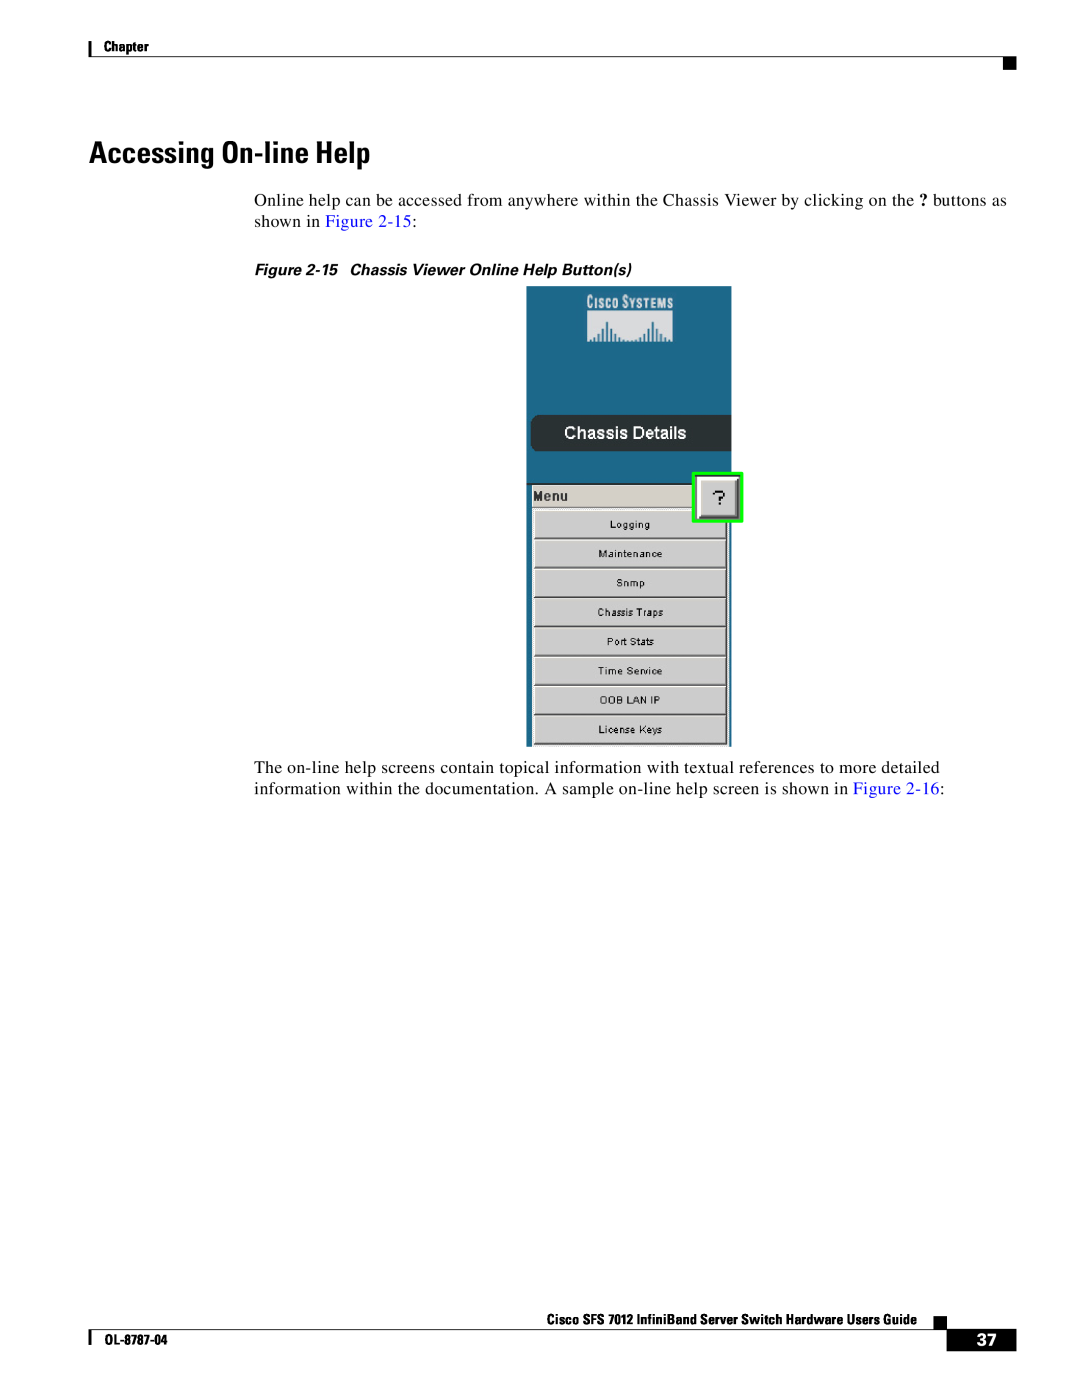 Cisco Systems SFS 7012 manual Accessing On-line Help, 15 Chassis Viewer Online Help Buttons 